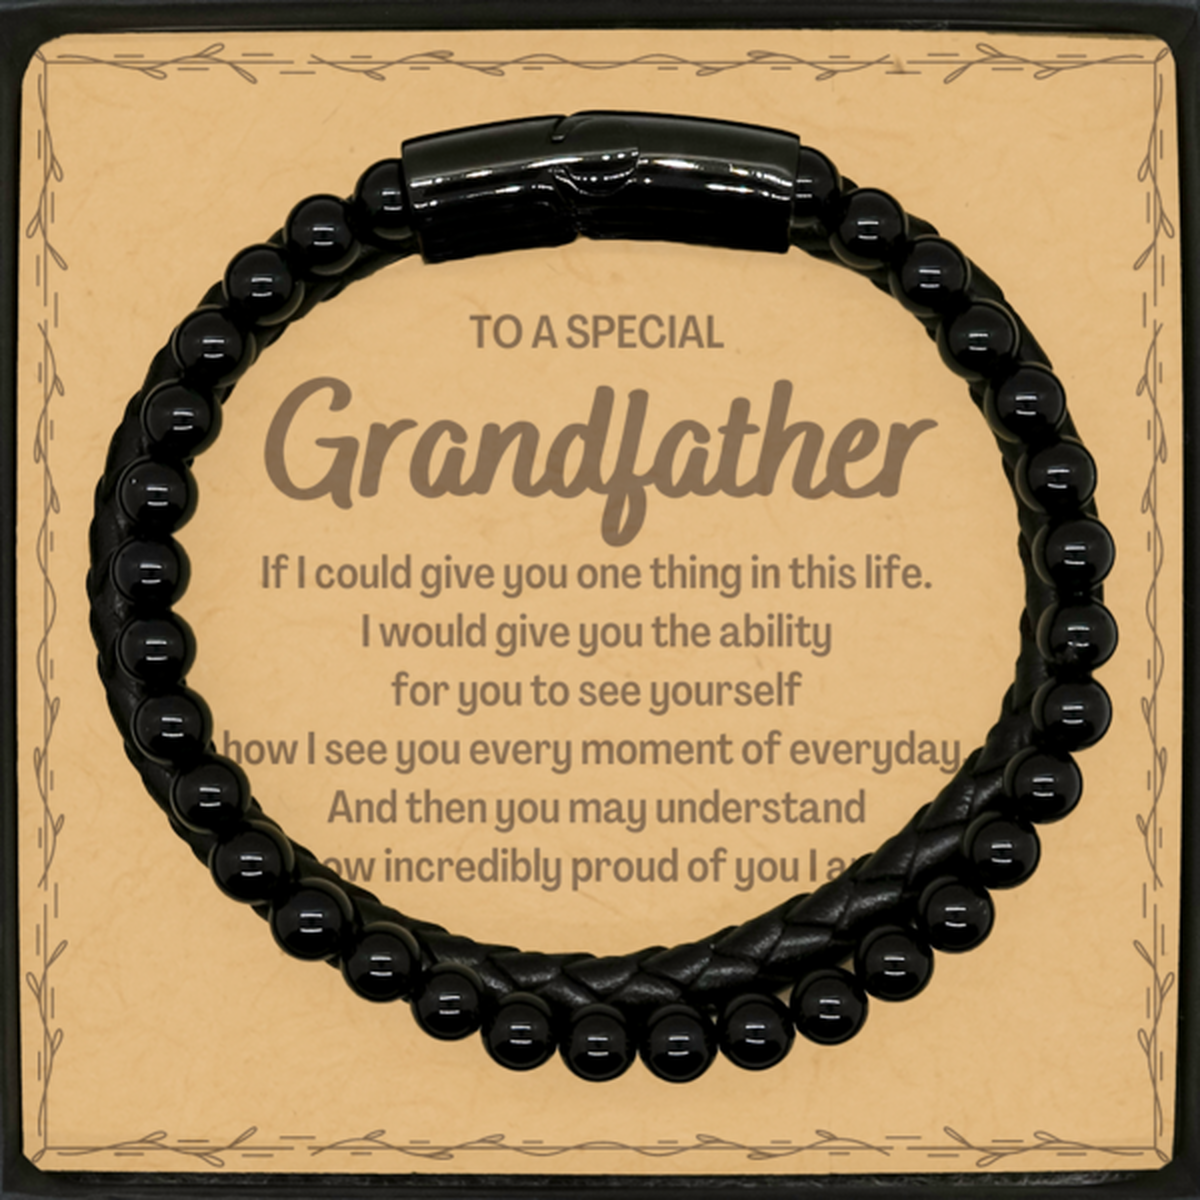 To My Grandfather Stone Leather Bracelets, Gifts For Grandfather Message Card, Inspirational Gifts for Christmas Birthday, Epic Gifts for Grandfather To A Special Grandfather how incredibly proud of you I am